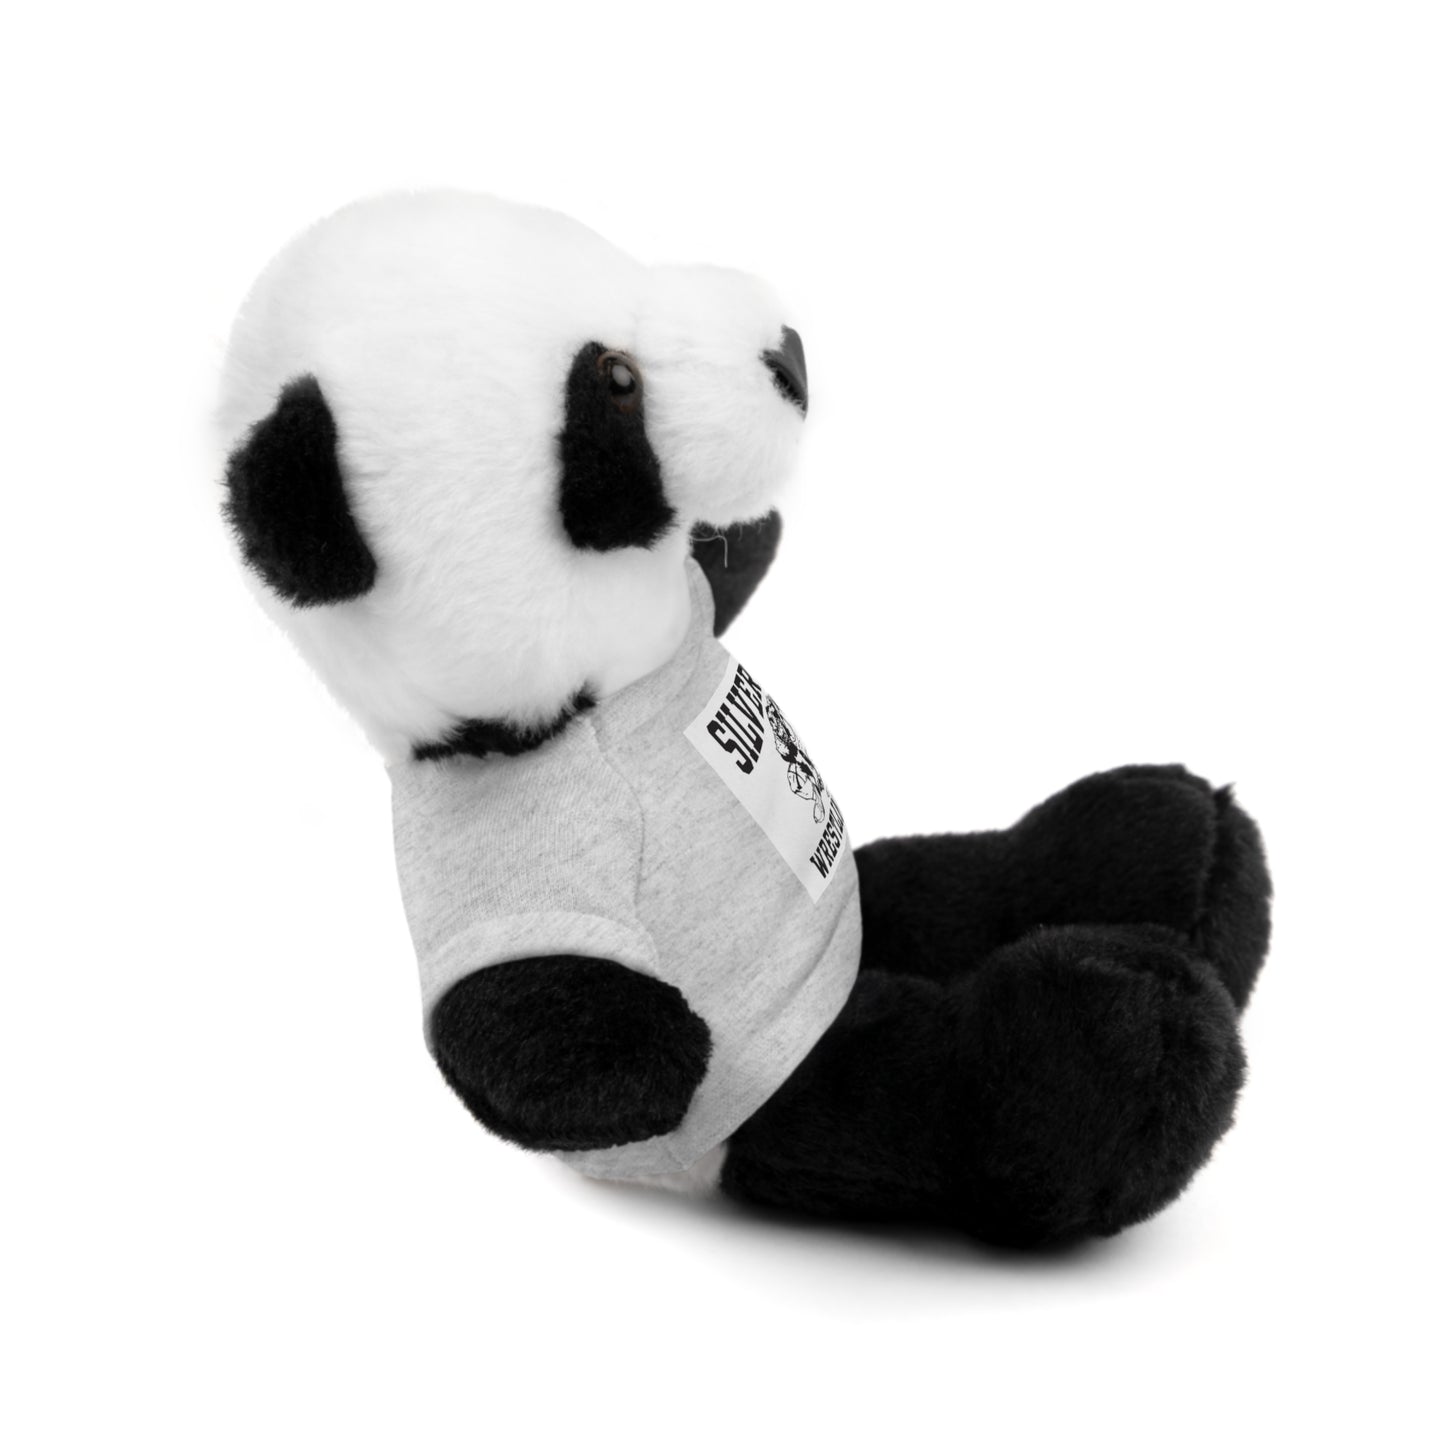 Silverback Wrestling Stuffed Animals with Tee (multiple animals and colors to choose from)